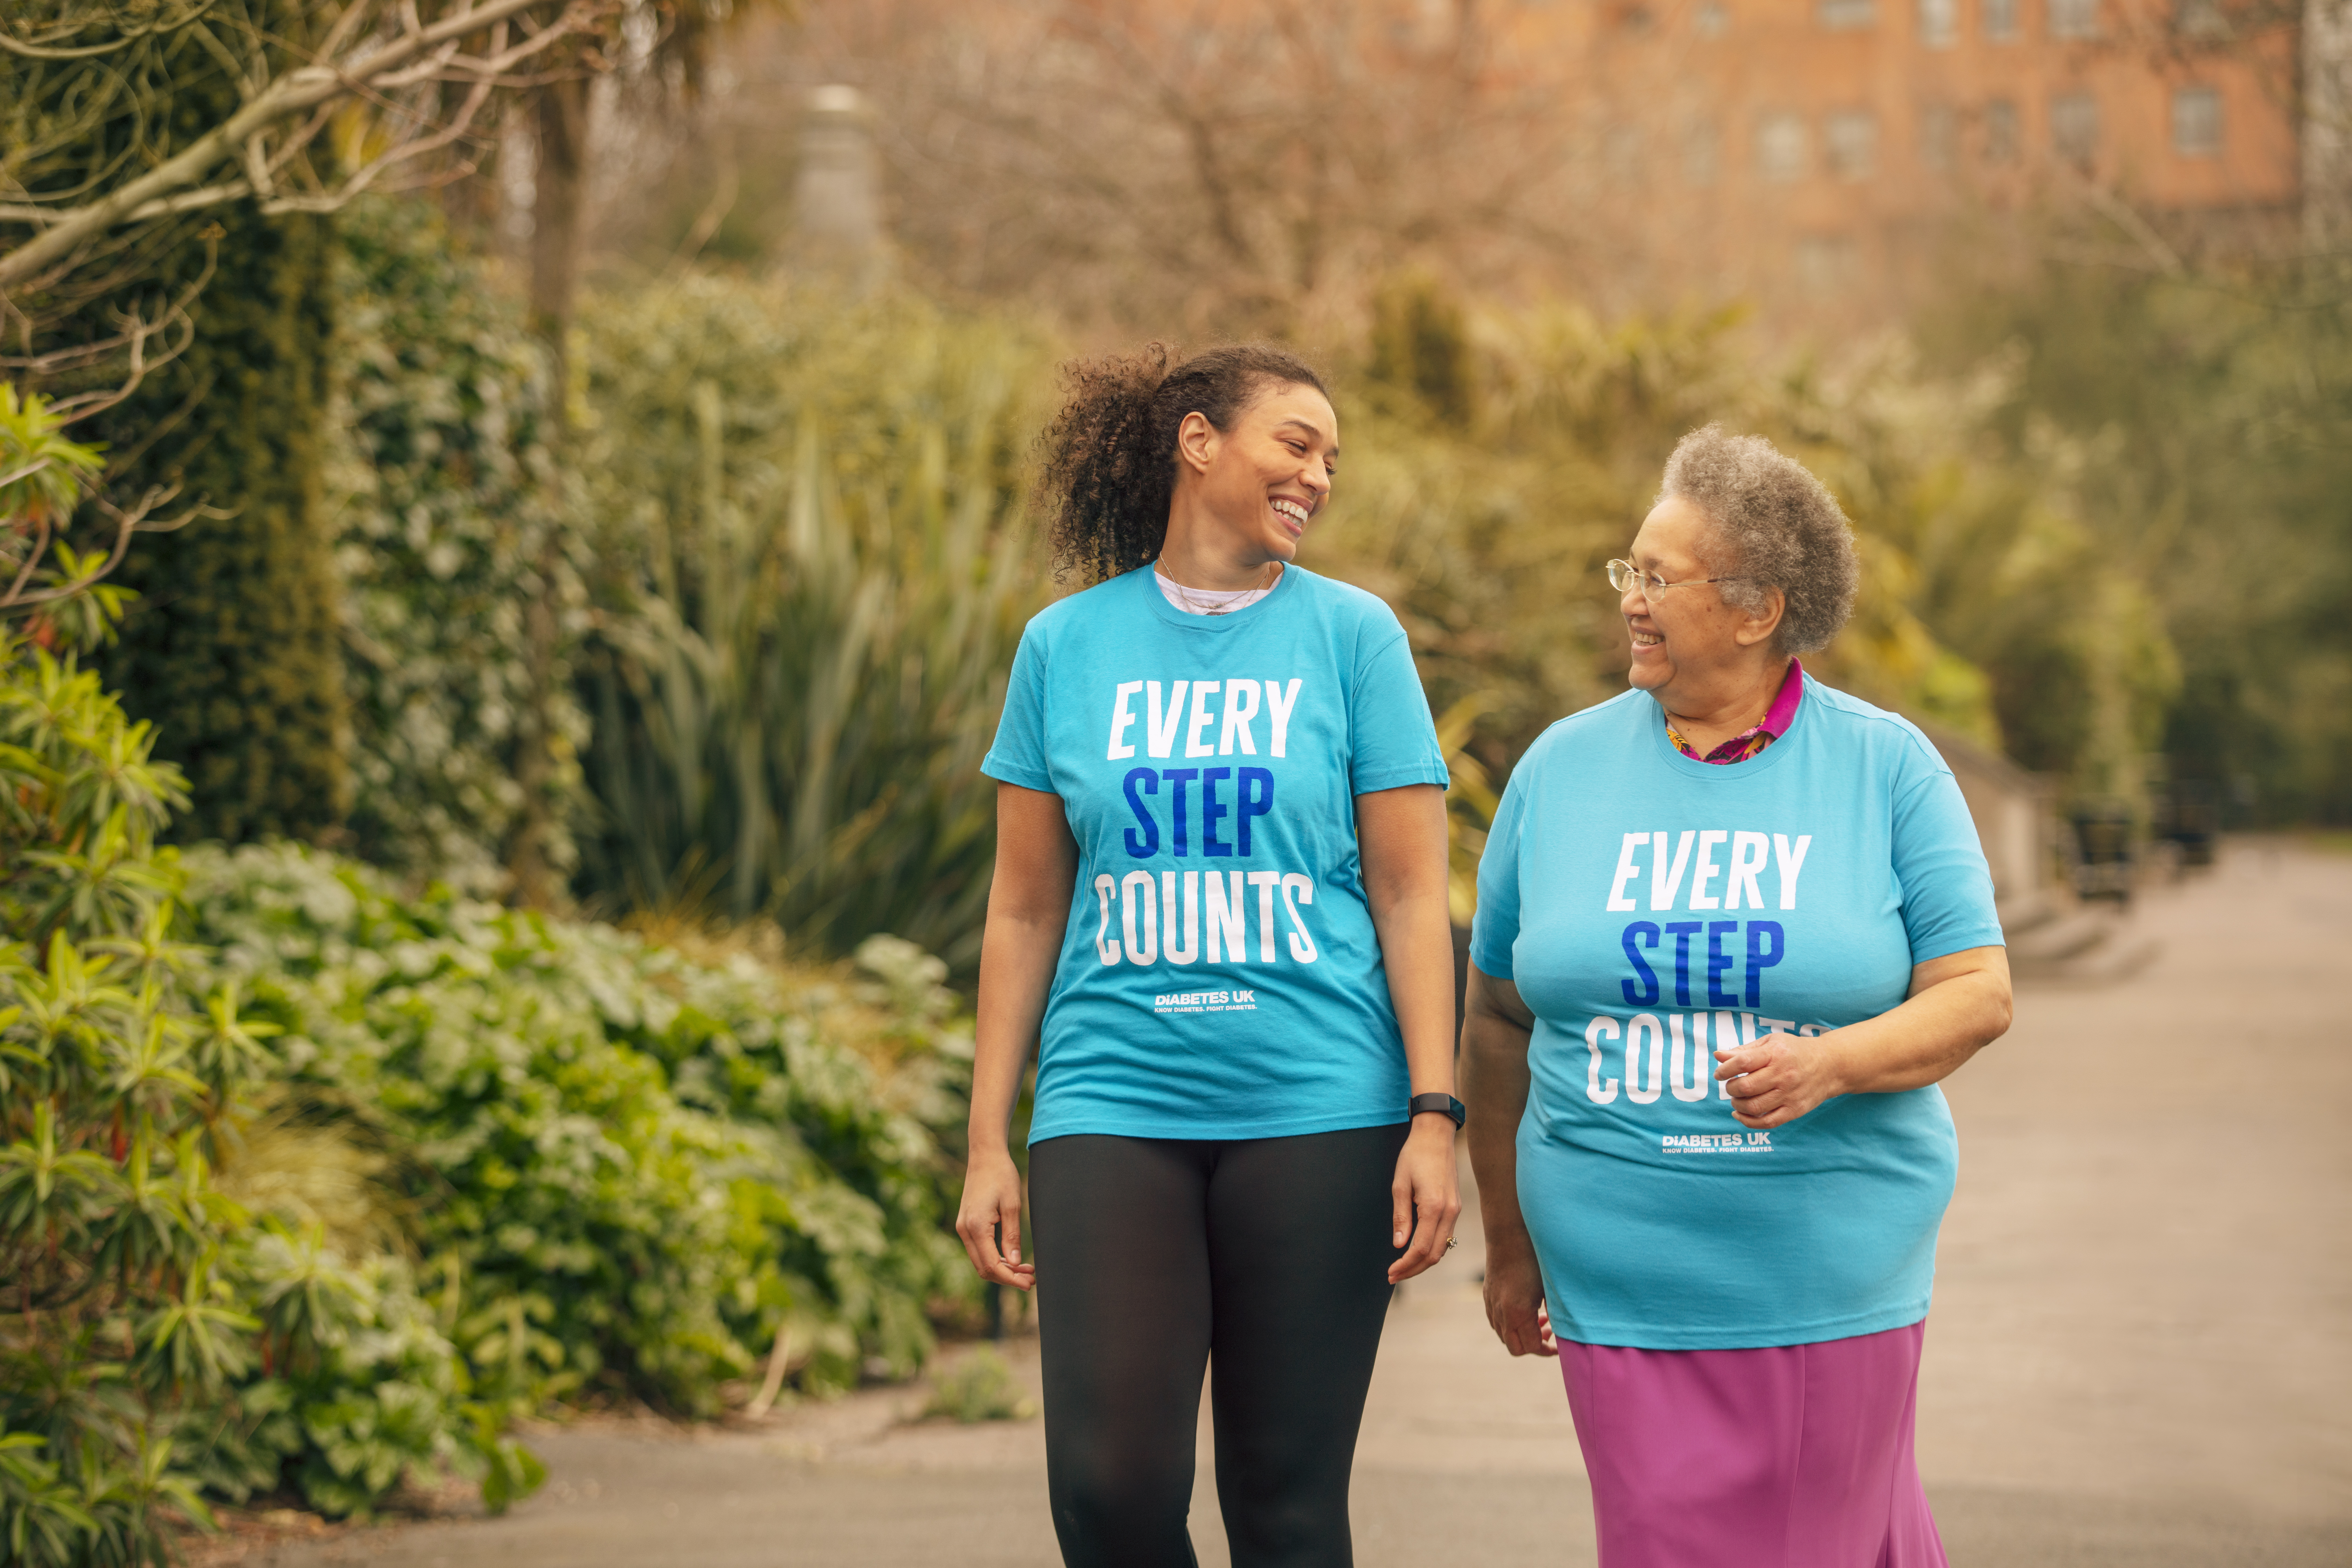 Two women taking part in One Million Step for Diabetes UK, wearing blue 'every step counts' shirts